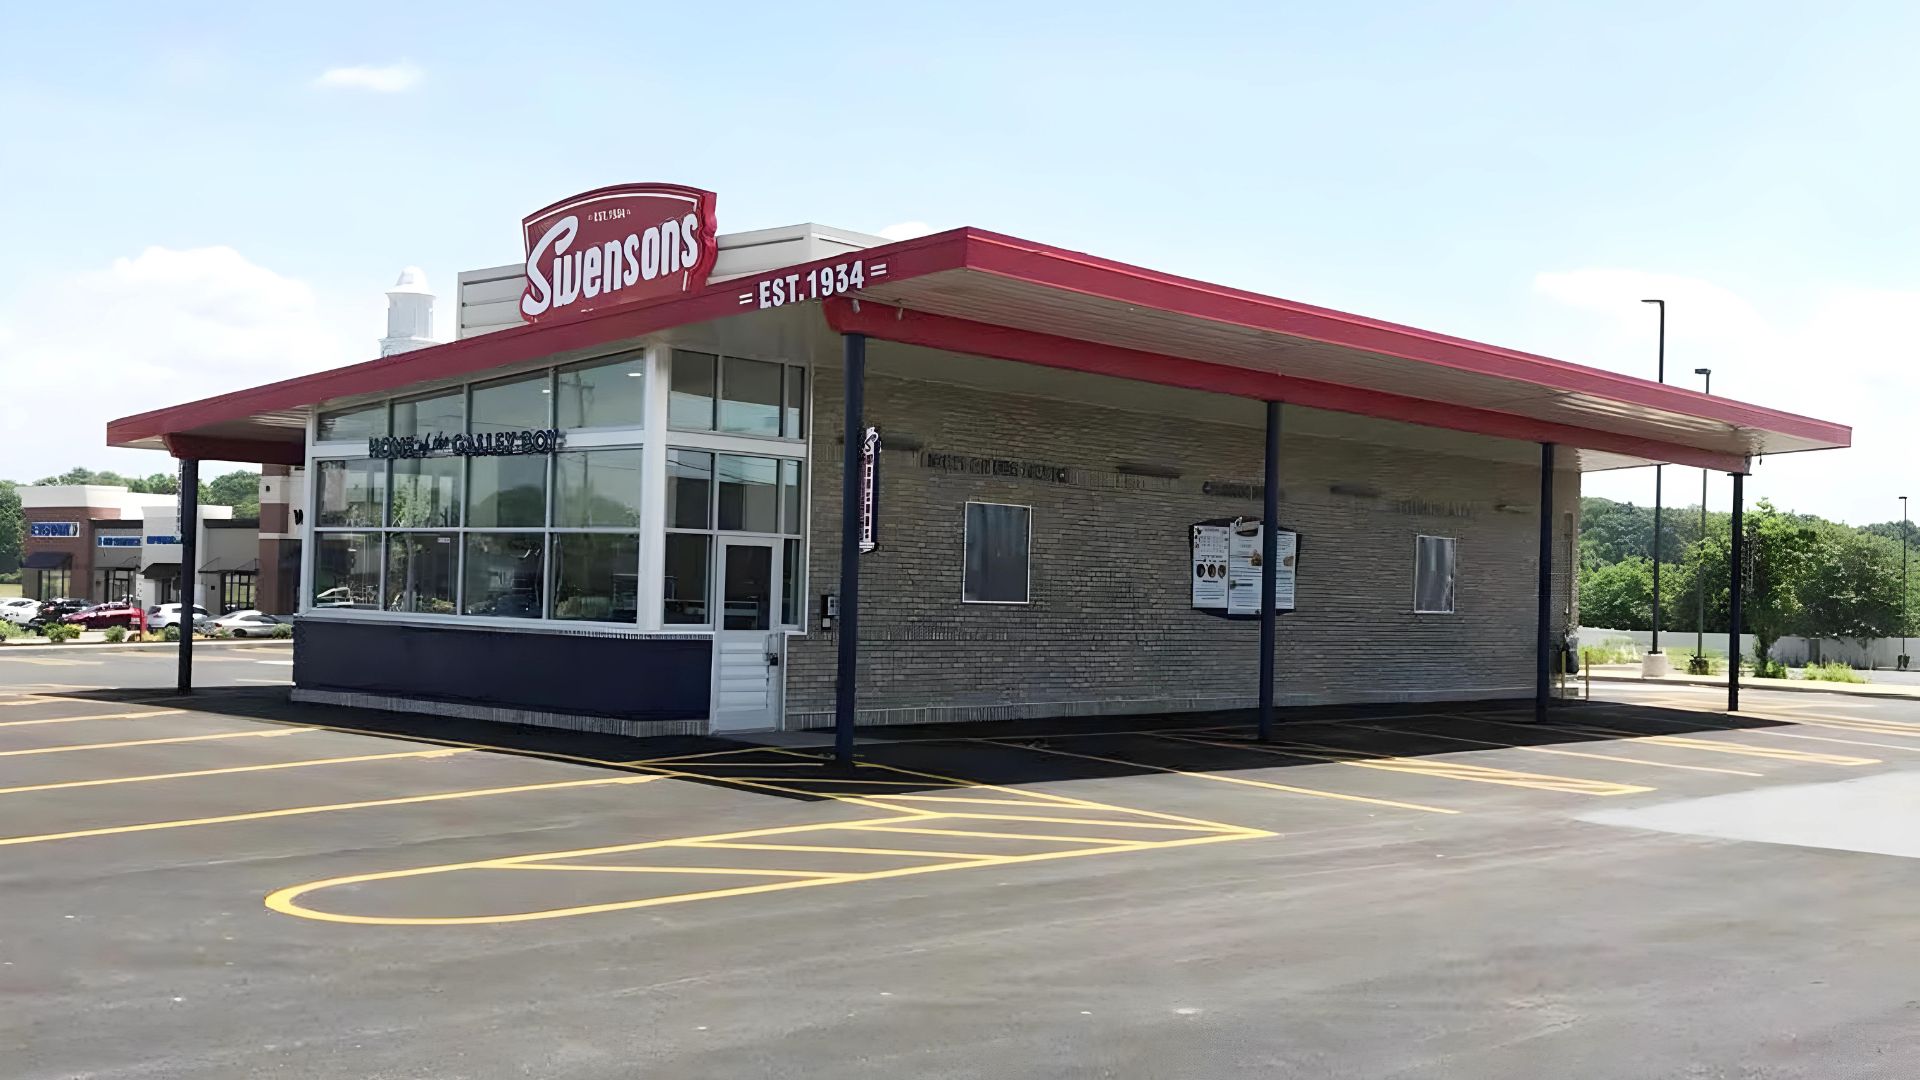 Swensons Drive Up Dining Poland OH 2